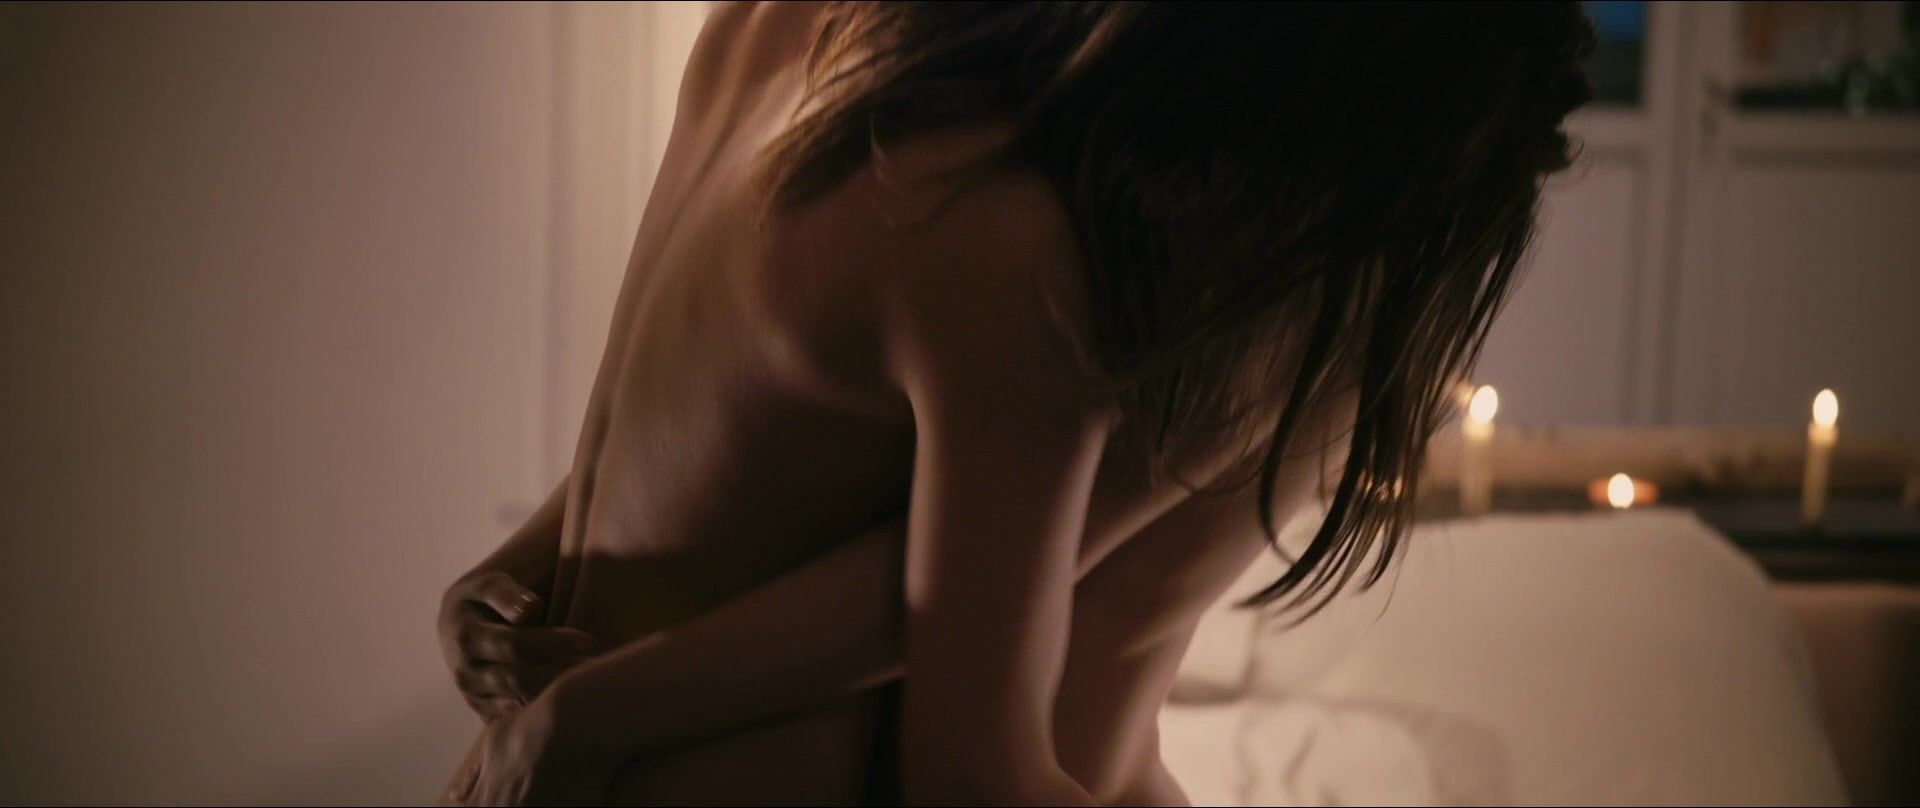 Natasha Nice Best lesbian scene in movies | Adele Exarchopoulos nude & Léa Seydoux naked | The film "Blue Is The Warmest Color" (2013) Free Amature